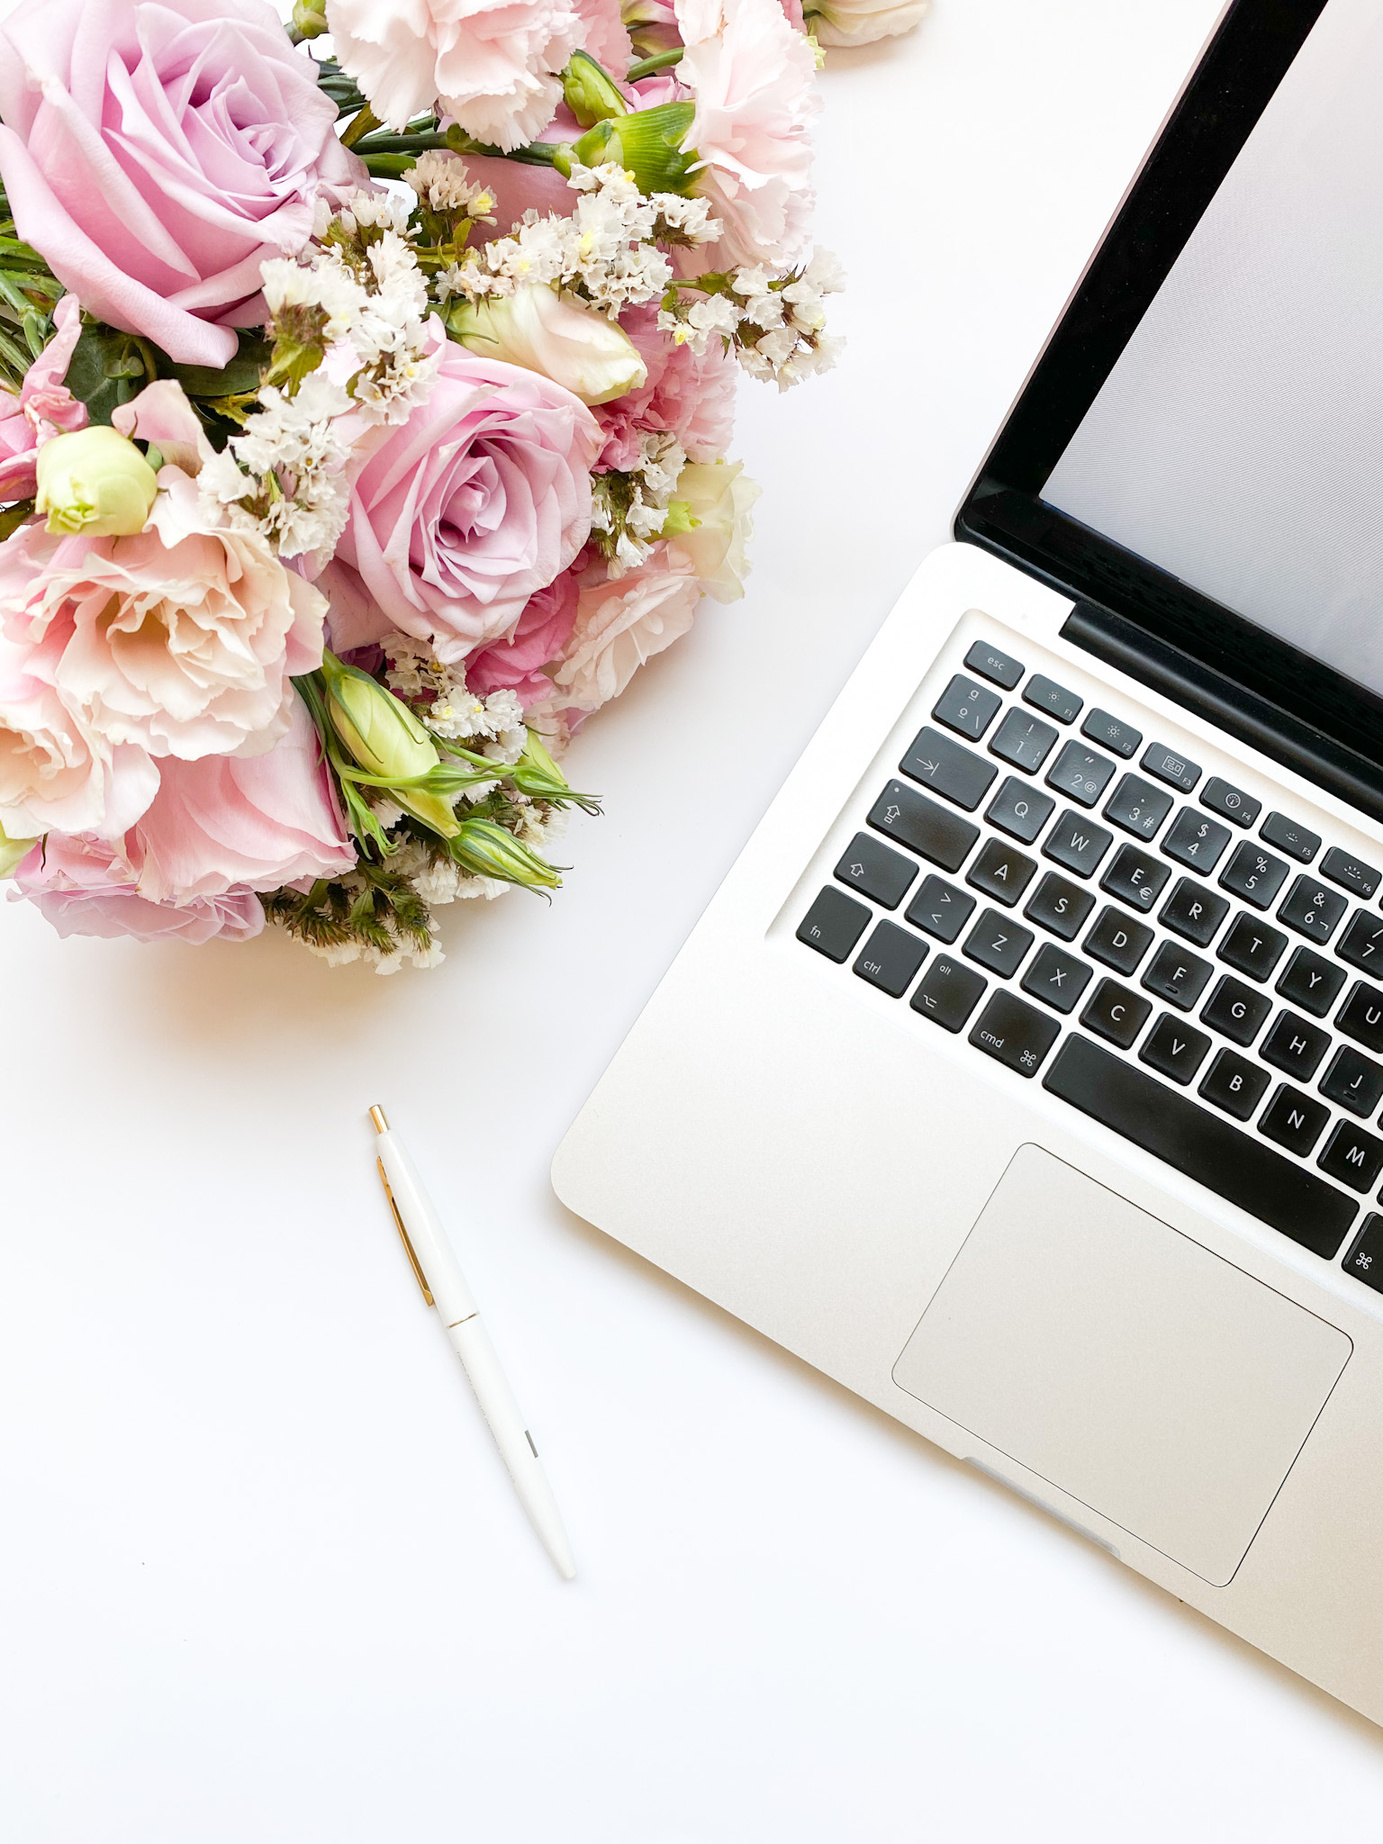 Flatlay of Laptop and Bouquet of Flowers